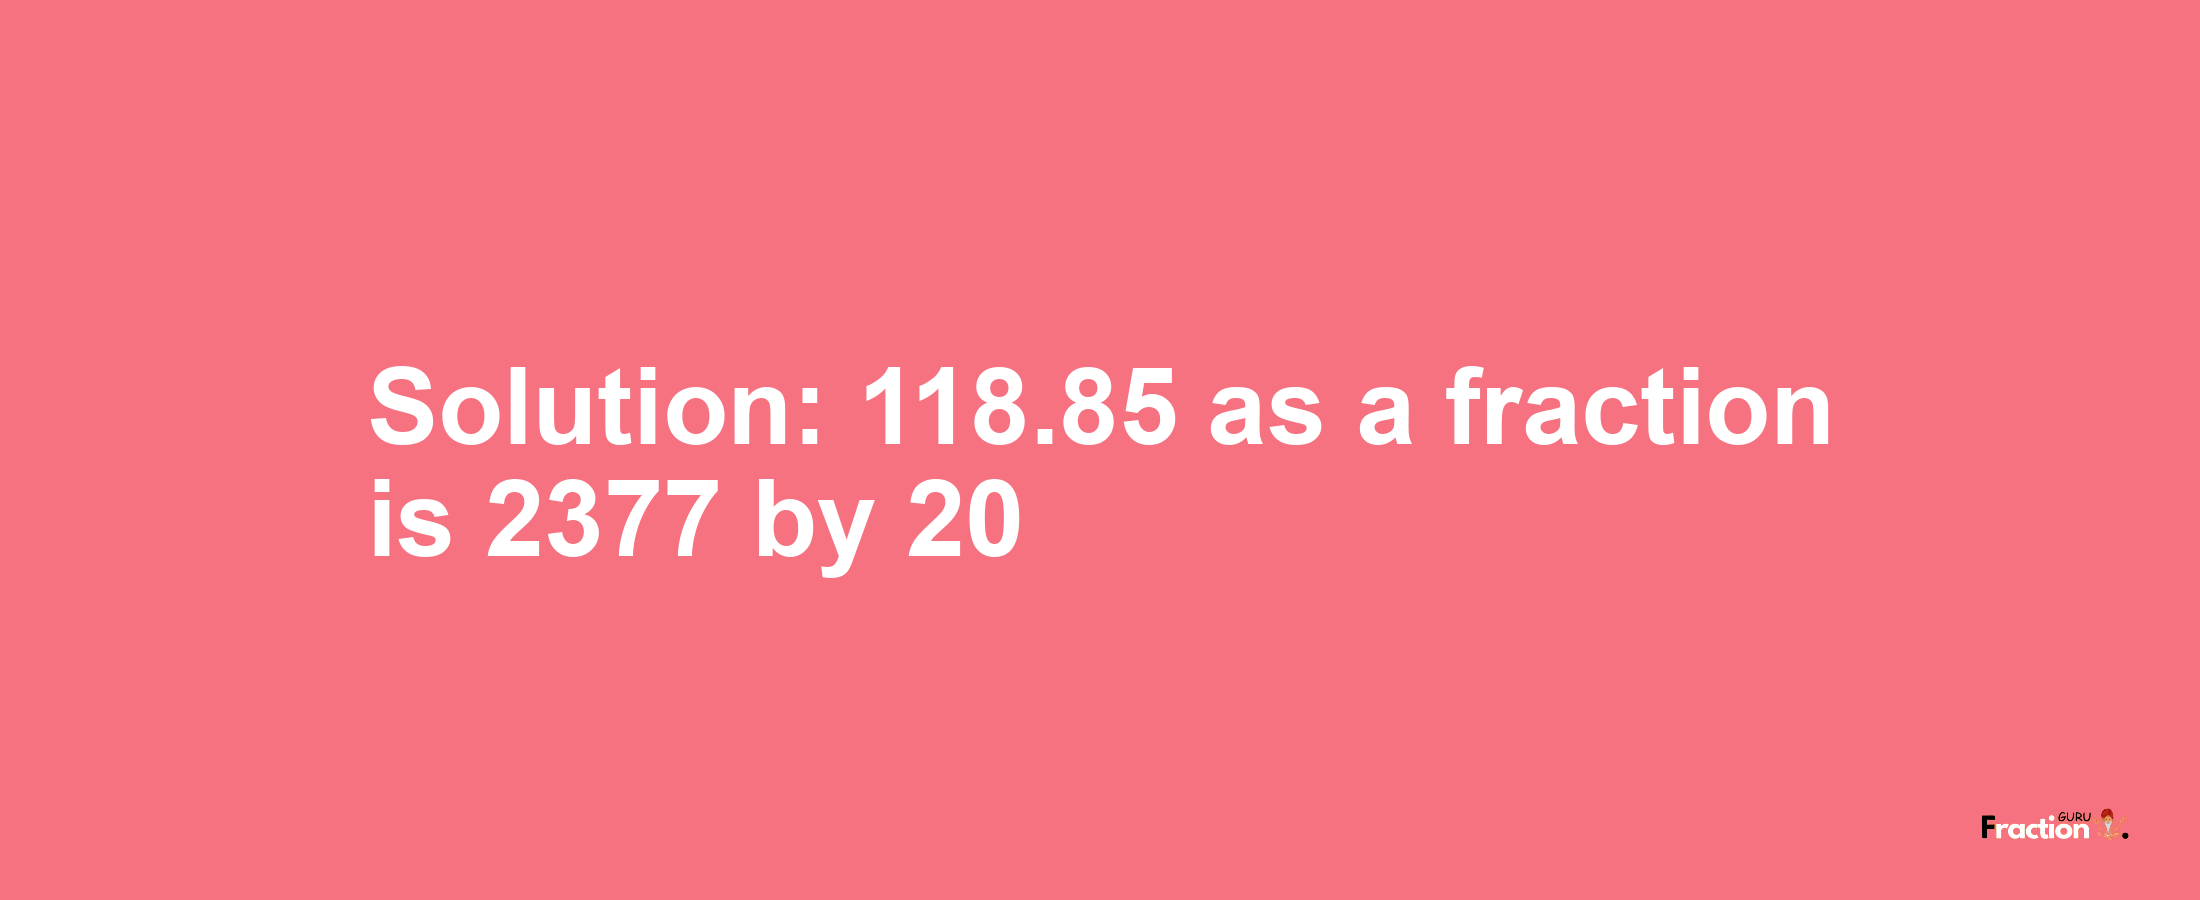 Solution:118.85 as a fraction is 2377/20